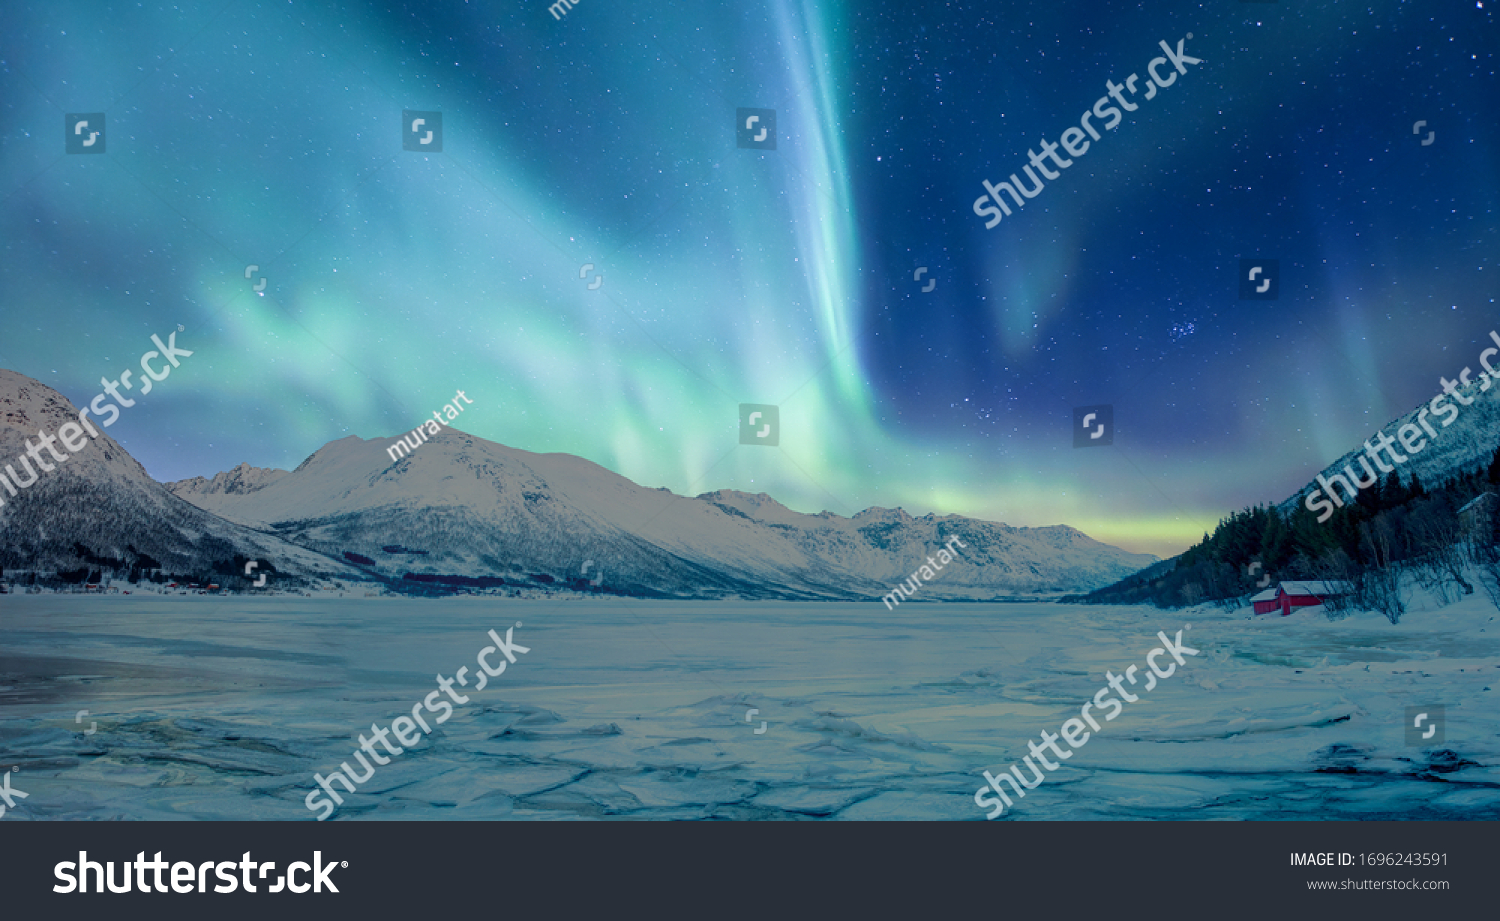 Northern lights or Aurora borealis in the sky over Tromso, Norway #1696243591